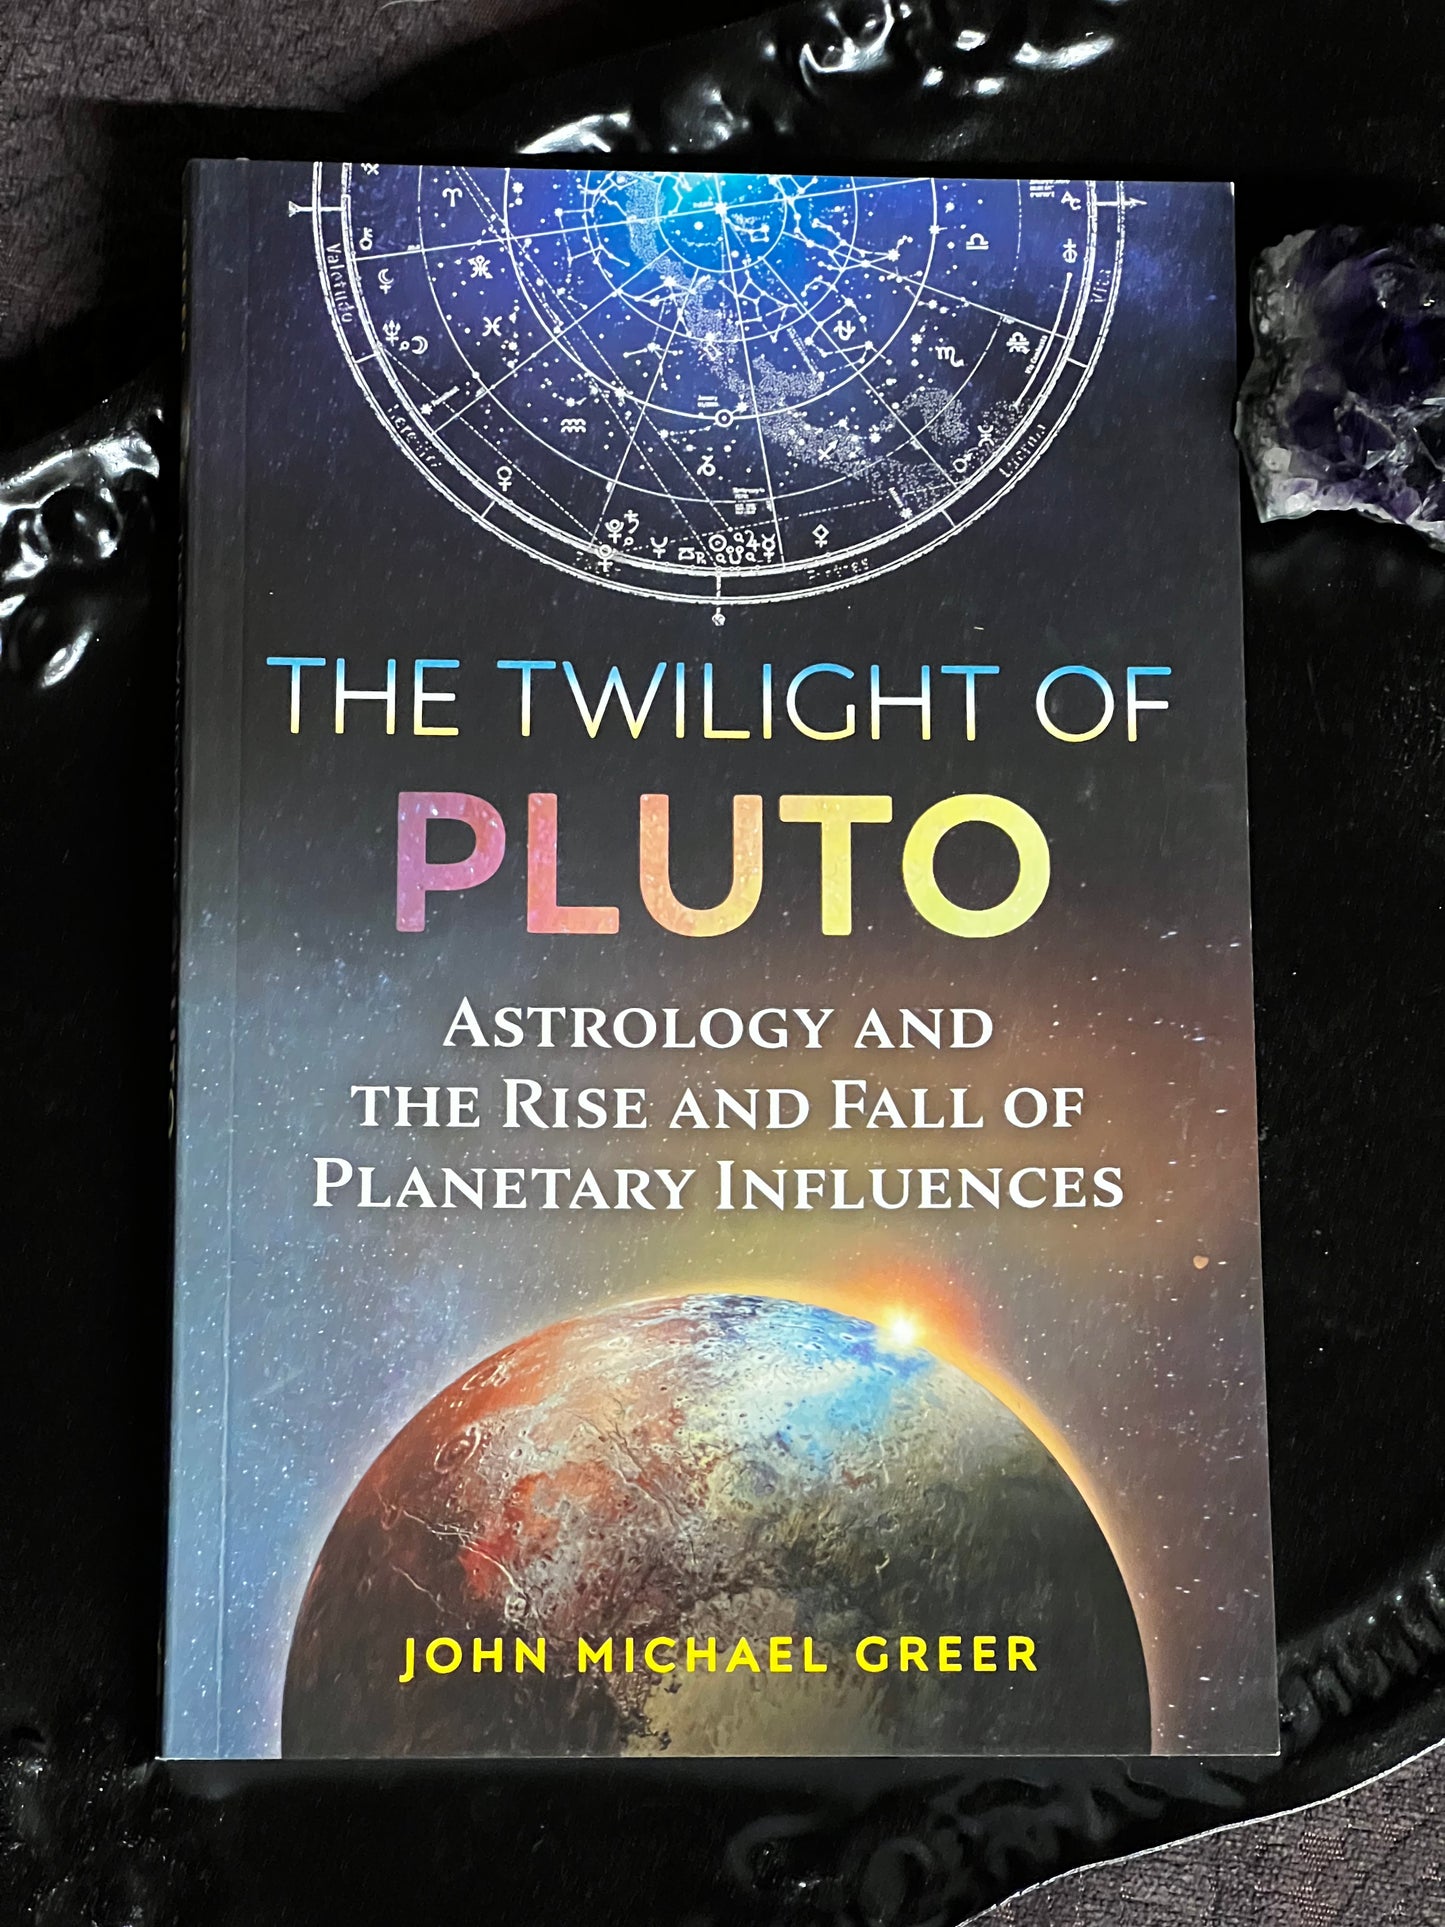 The Twilight of Pluto Astrology and The Rise and Fall of Planetary Influences